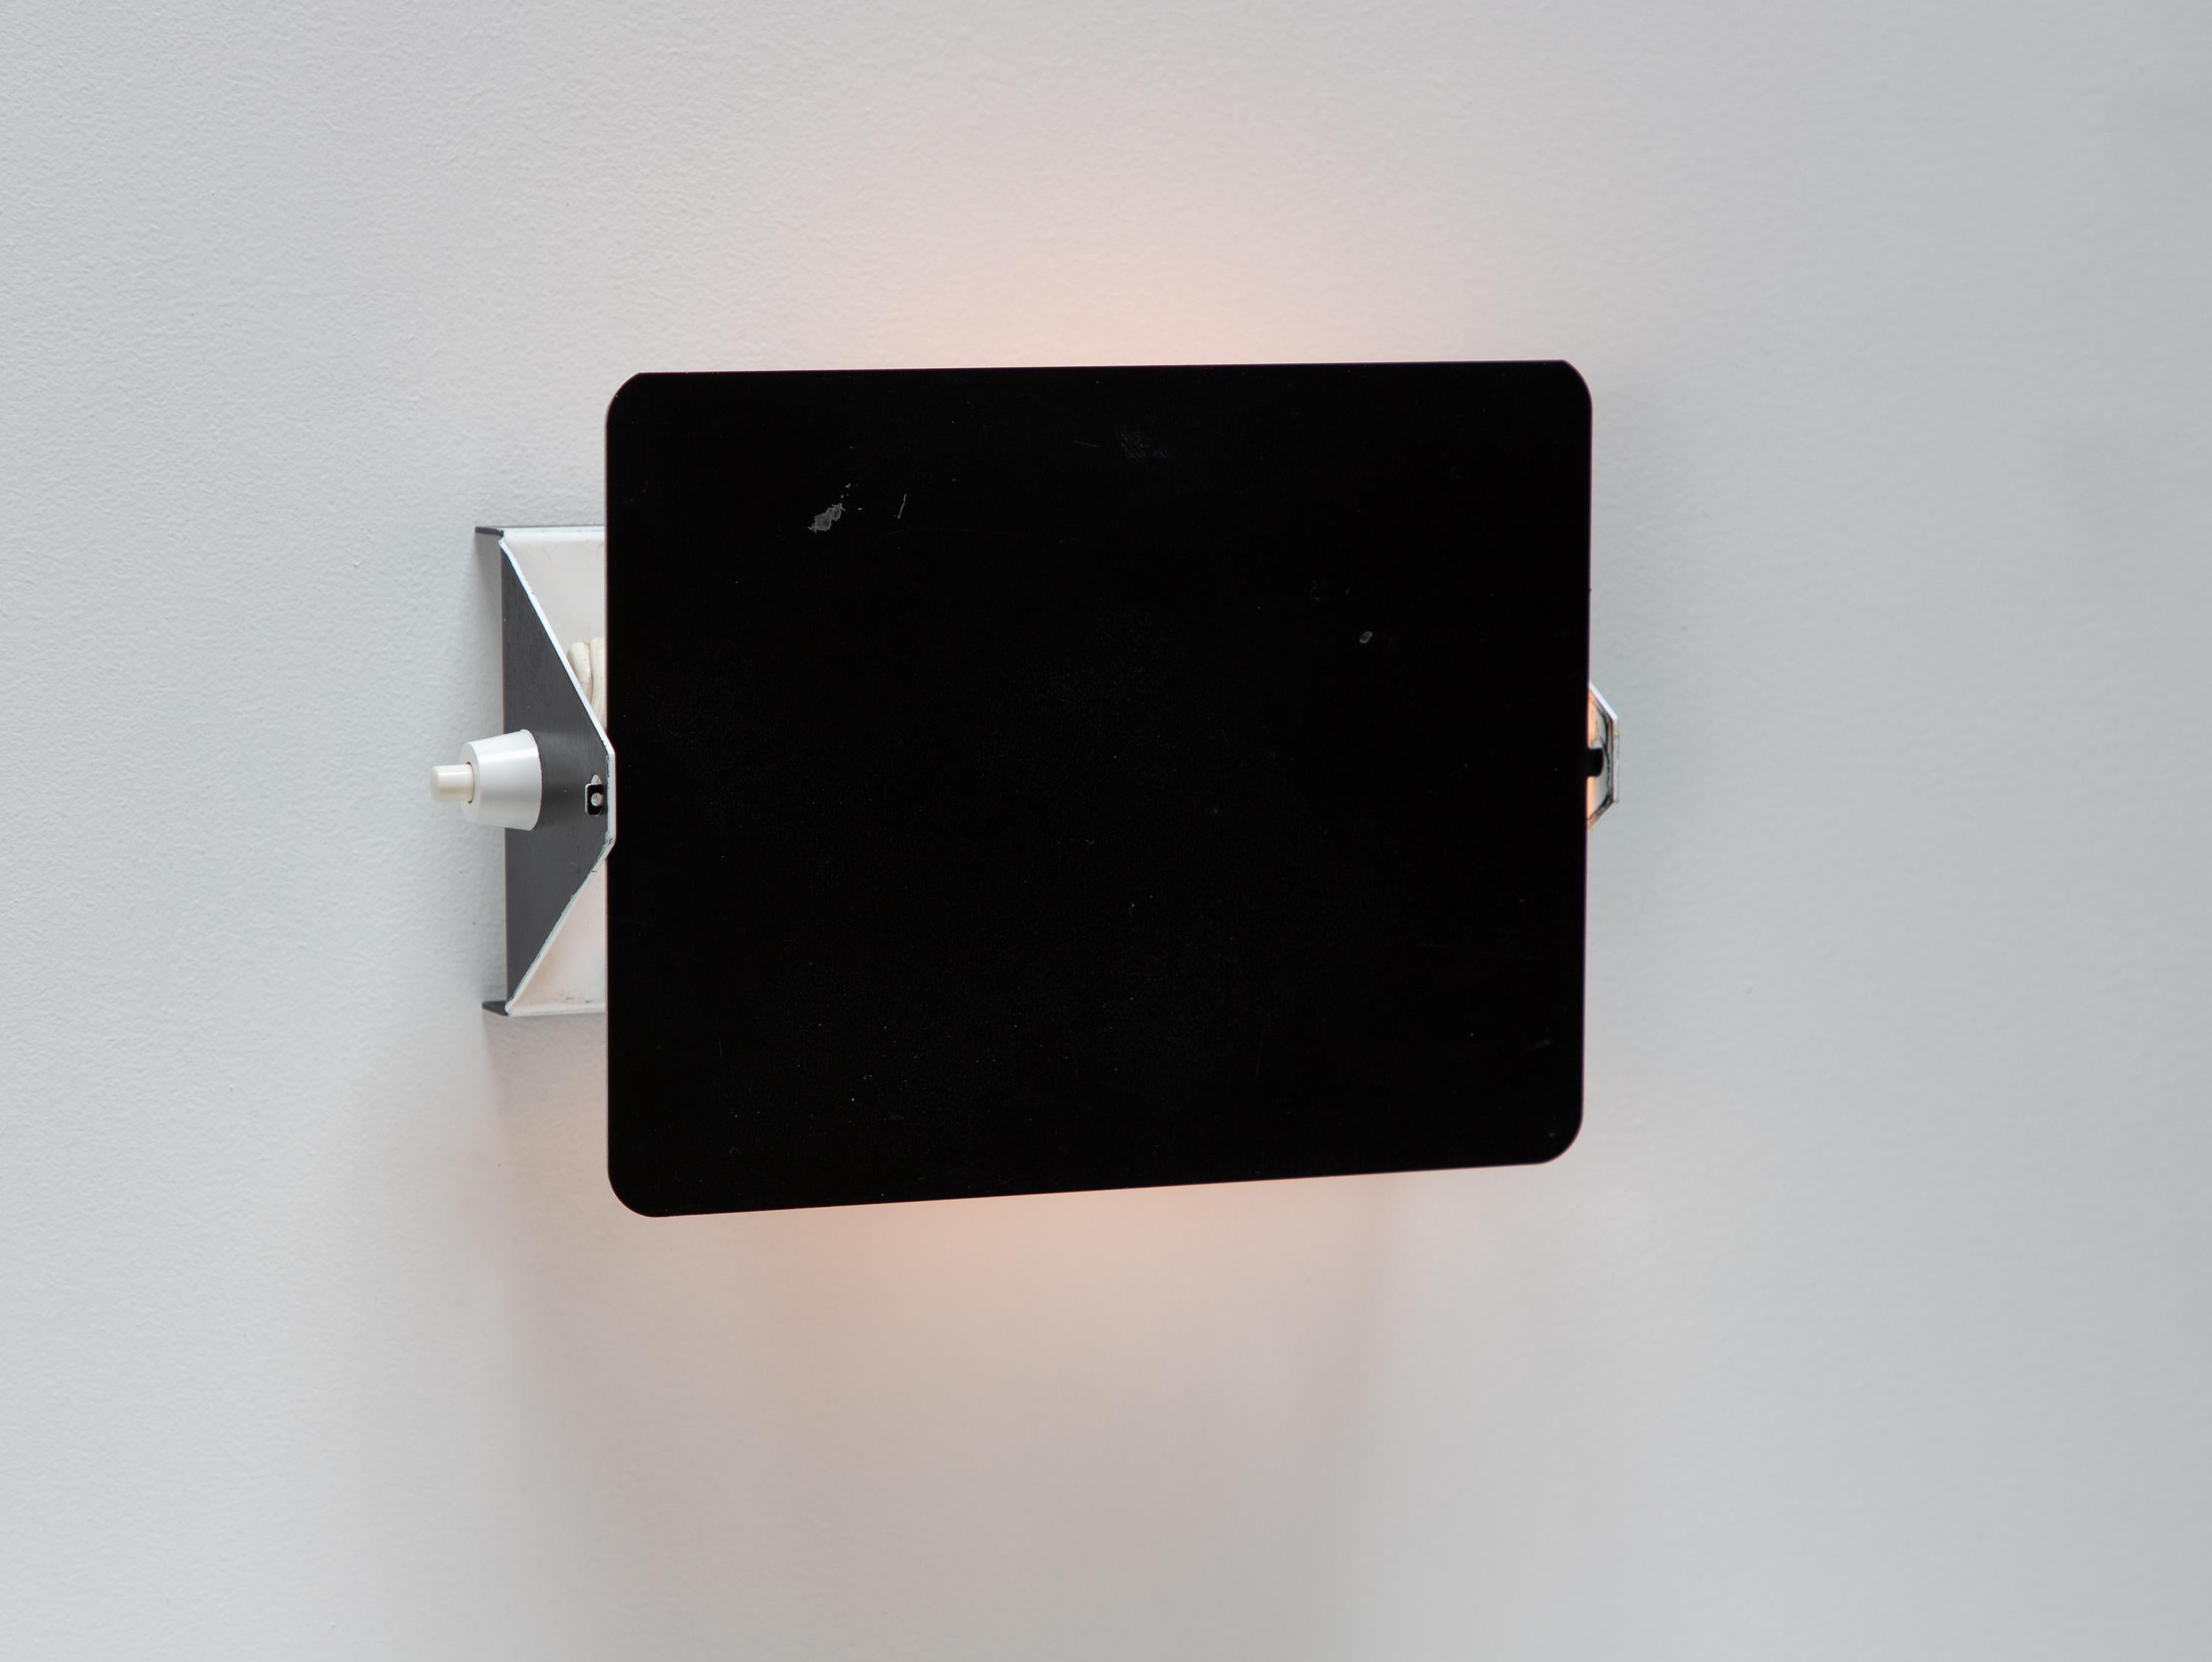 Vintage Charlotte Perriand Les Arcs CP1 Wall Light or Sconces - Black For Sale 3